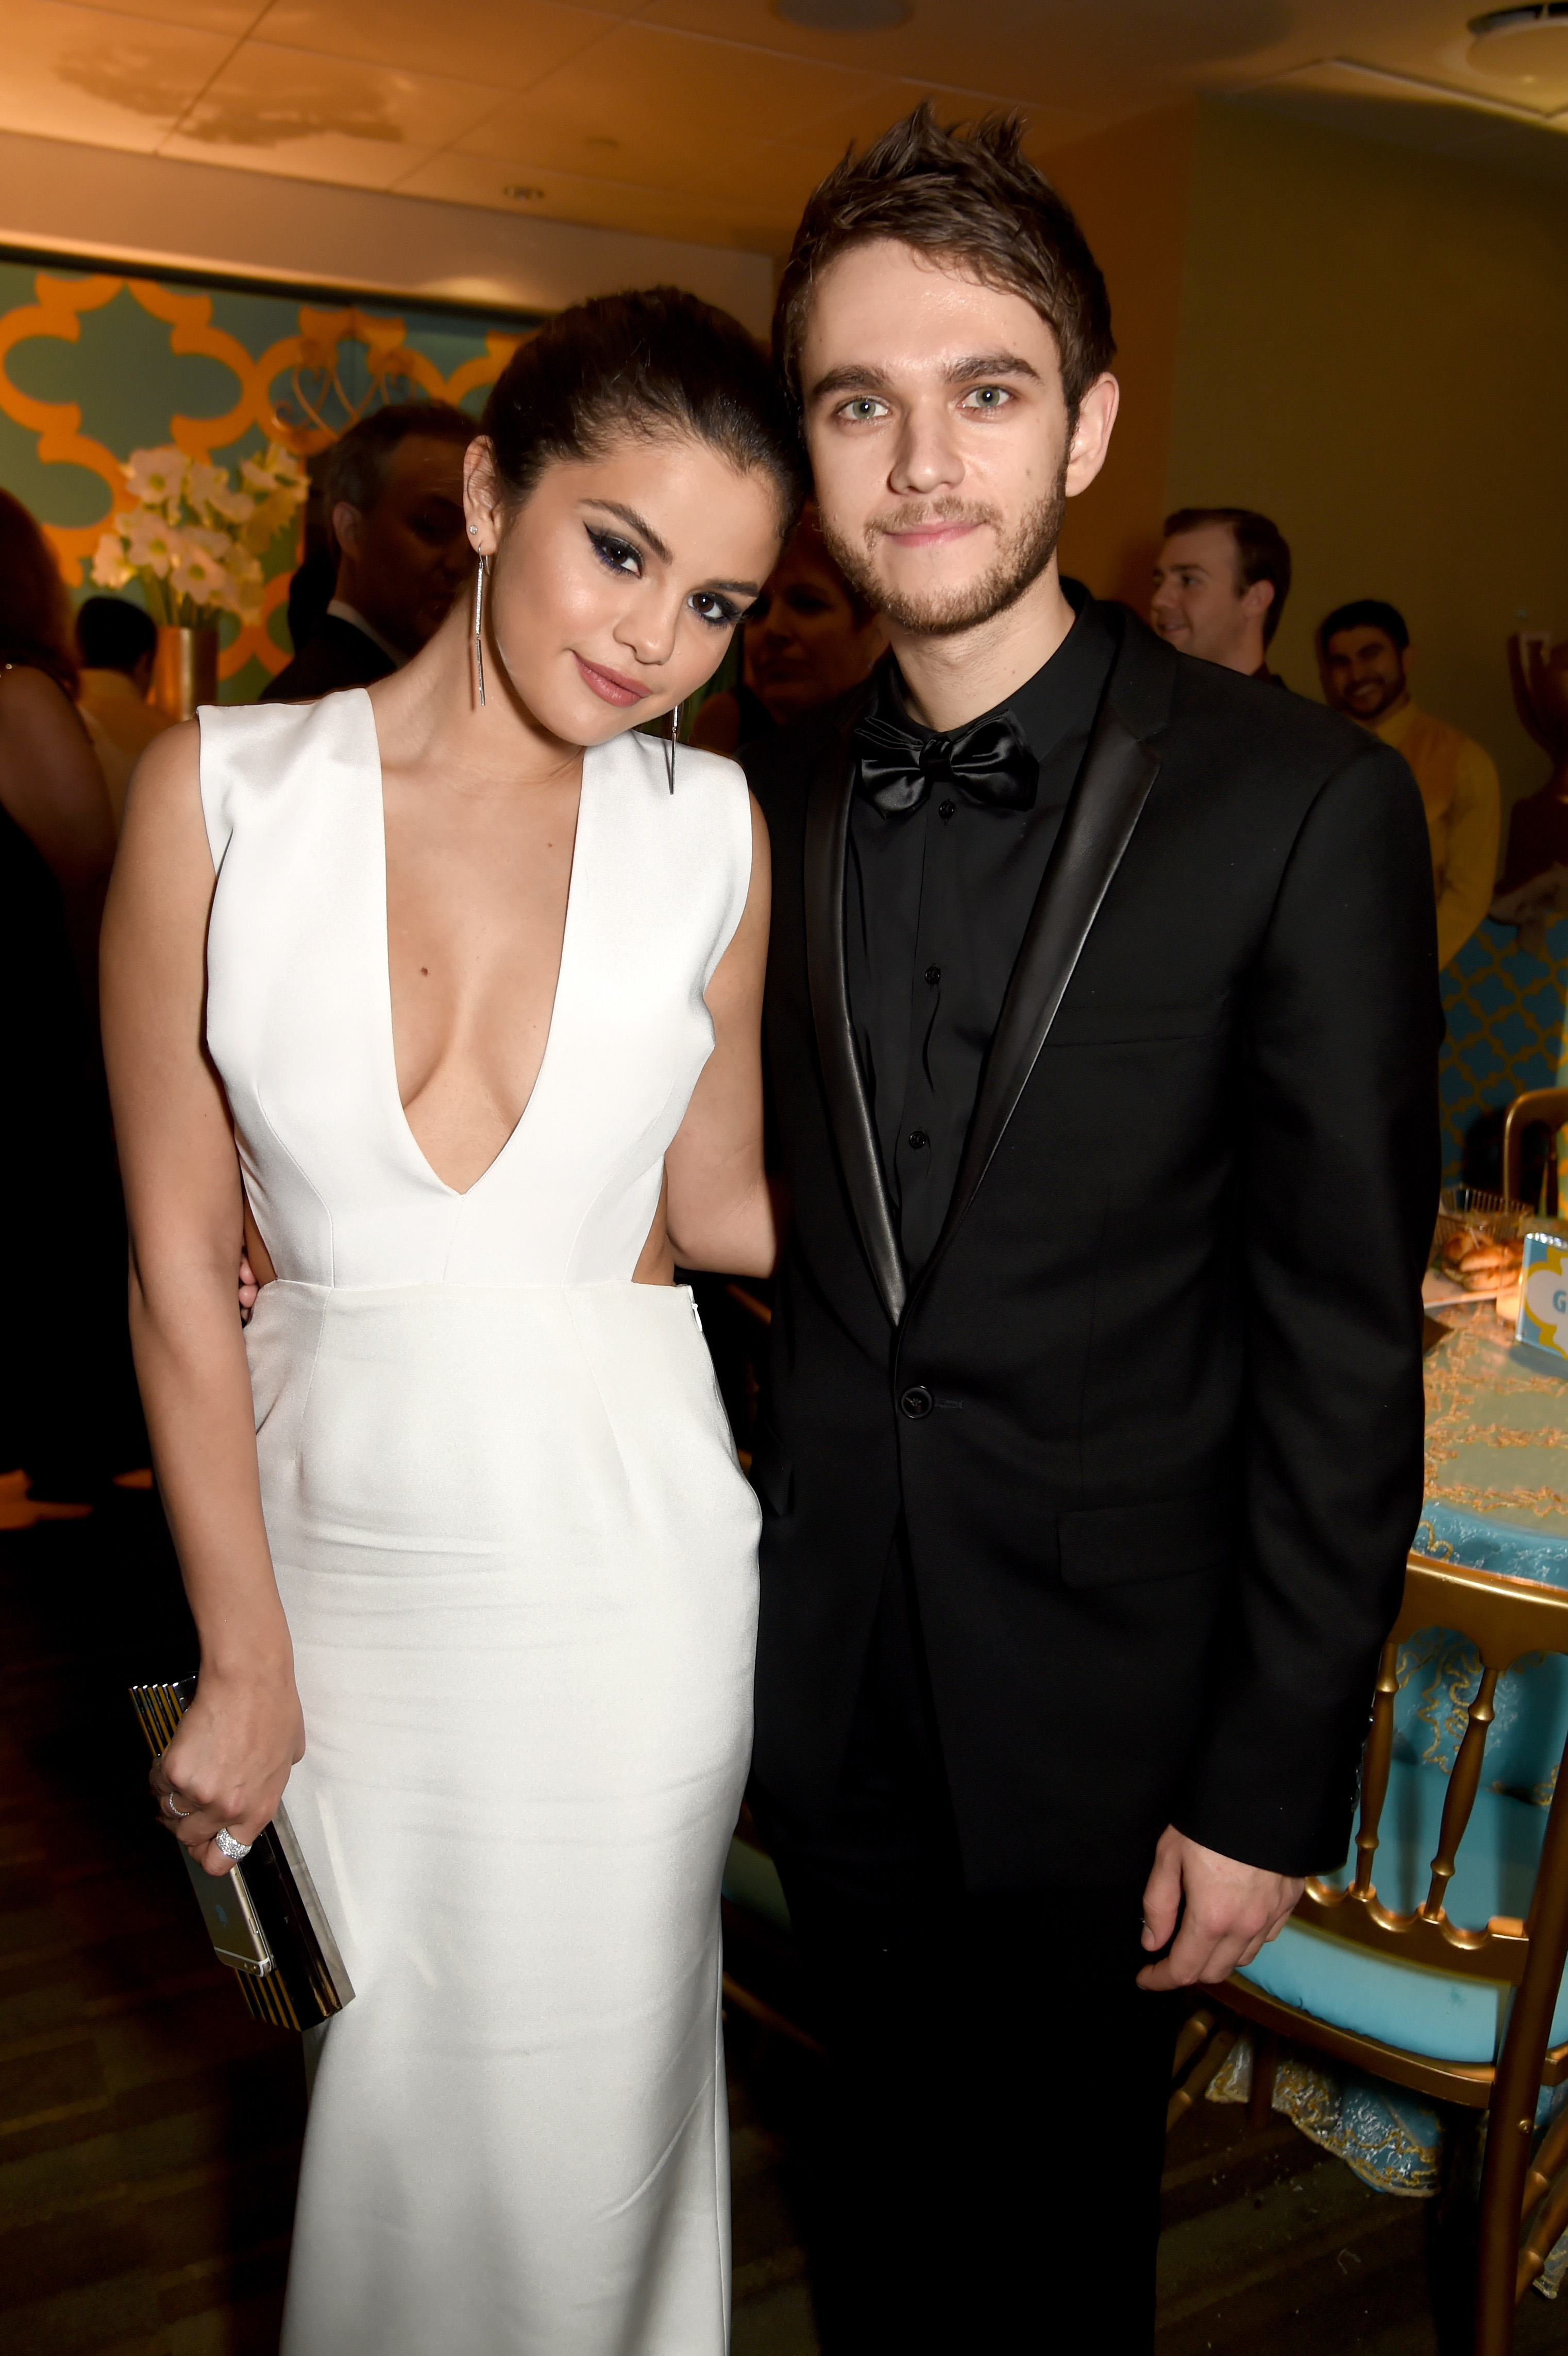 Selena Gomez and Zedd attend HBO's Official Golden Globe Awards After Party at The Beverly Hilton Hotel on January 11, 2015, in Beverly Hills, California. | Source: Getty Images